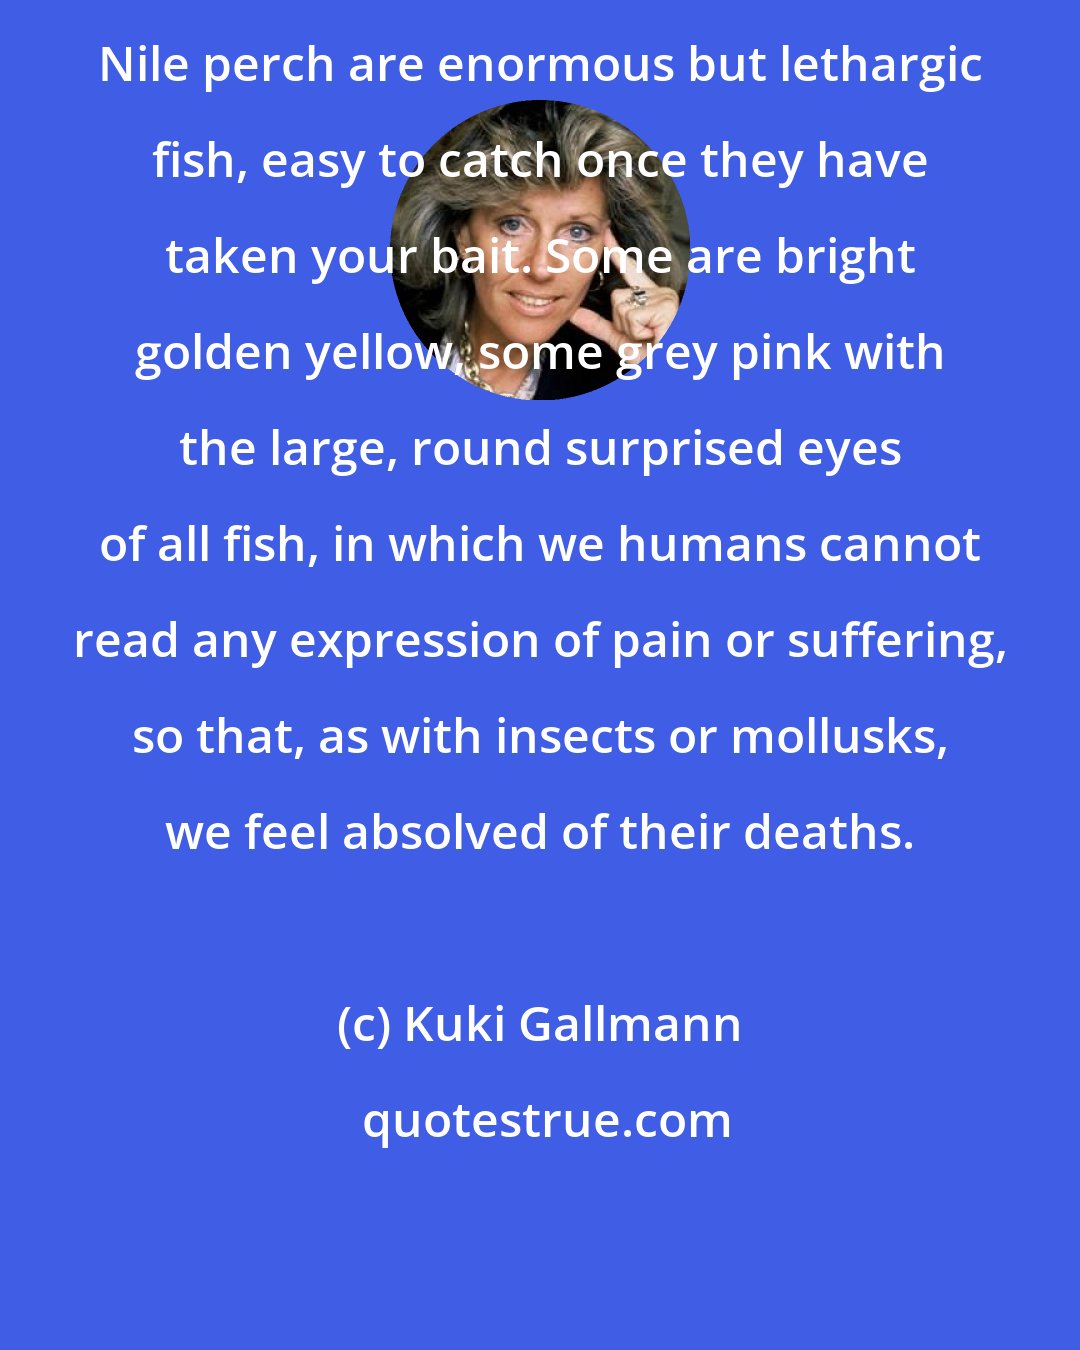 Kuki Gallmann: Nile perch are enormous but lethargic fish, easy to catch once they have taken your bait. Some are bright golden yellow, some grey pink with the large, round surprised eyes of all fish, in which we humans cannot read any expression of pain or suffering, so that, as with insects or mollusks, we feel absolved of their deaths.